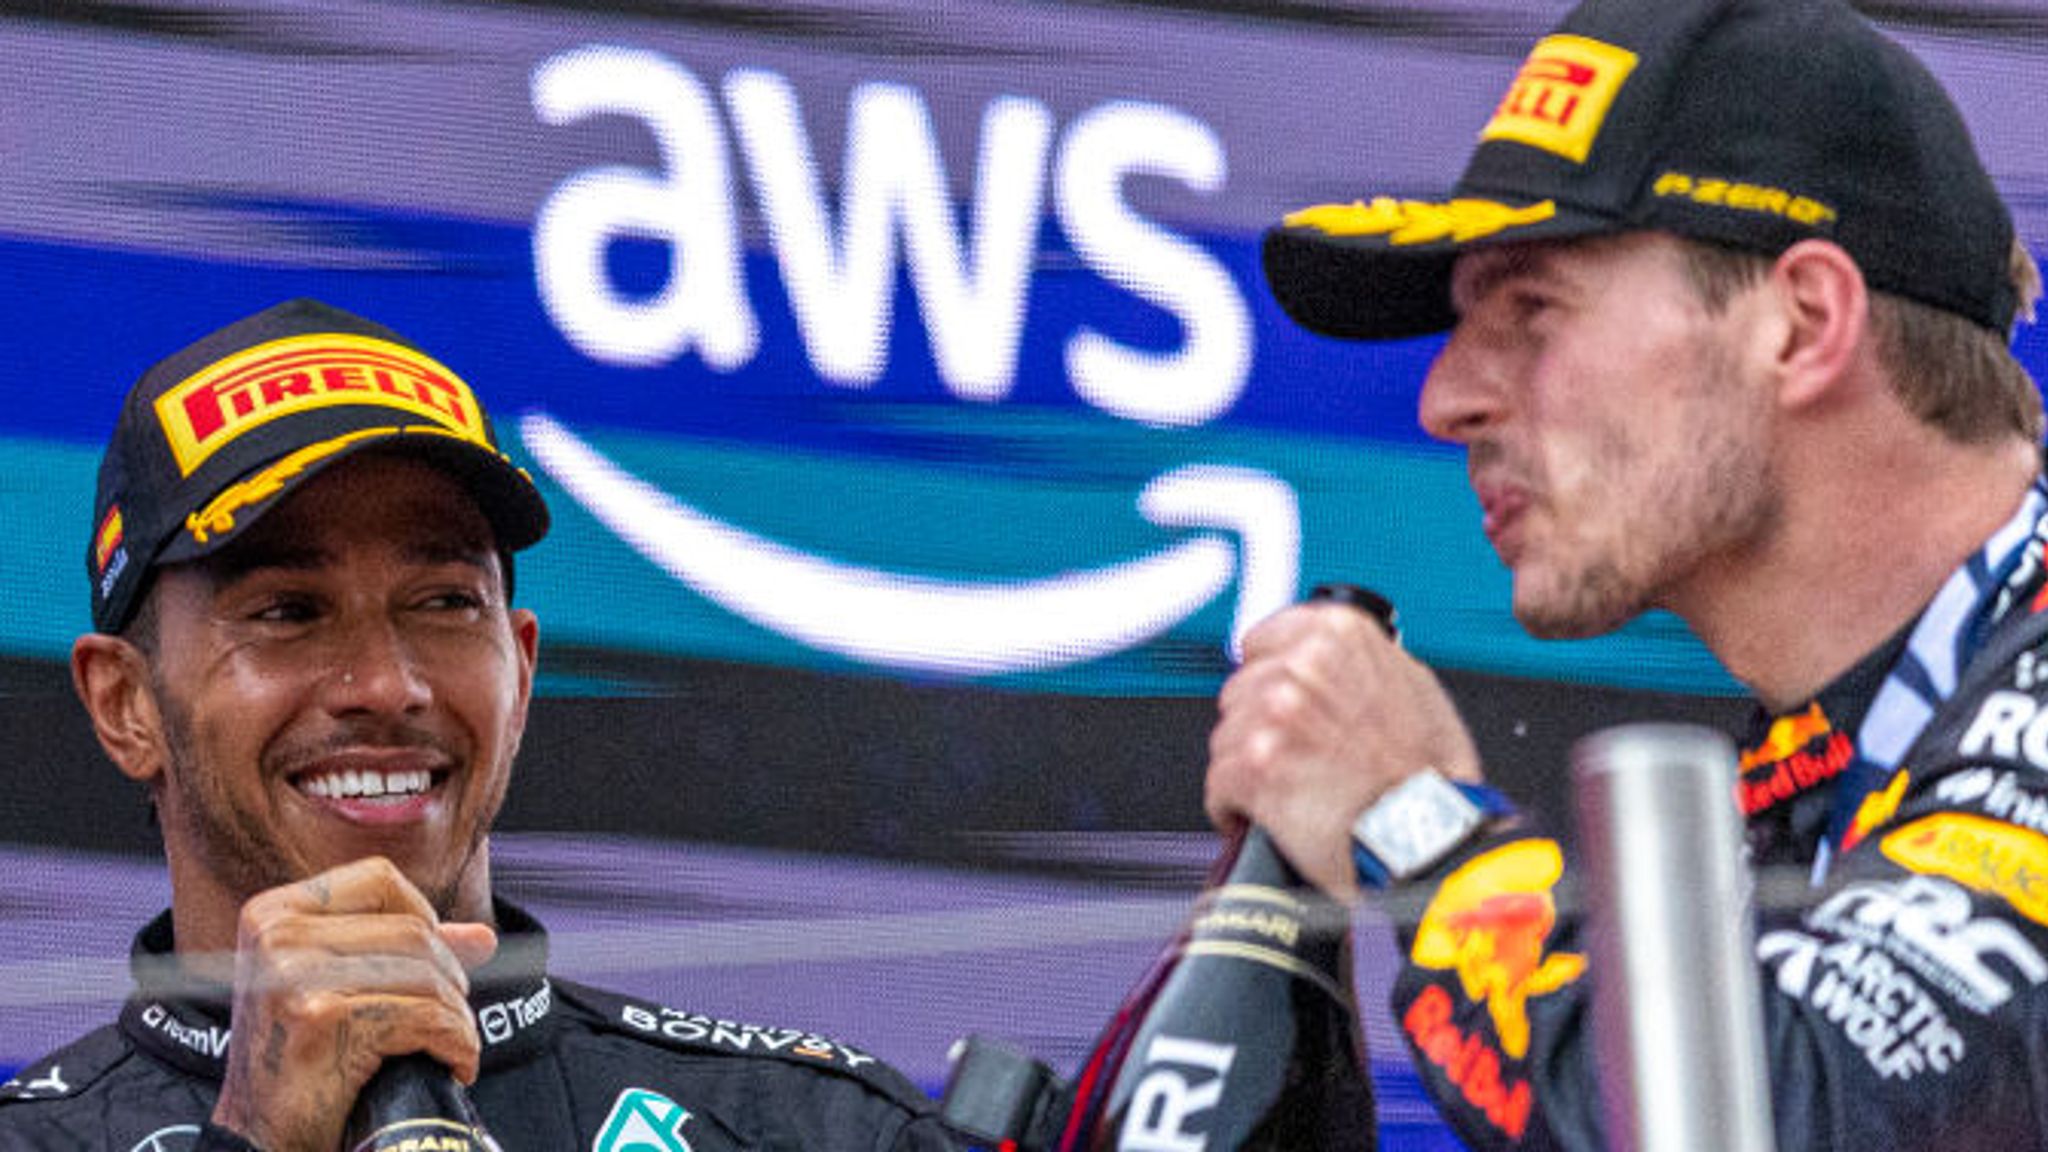 Martin Brundle reviews the Spanish GP after Max Verstappen victory and Mercedes resurgence F1 News